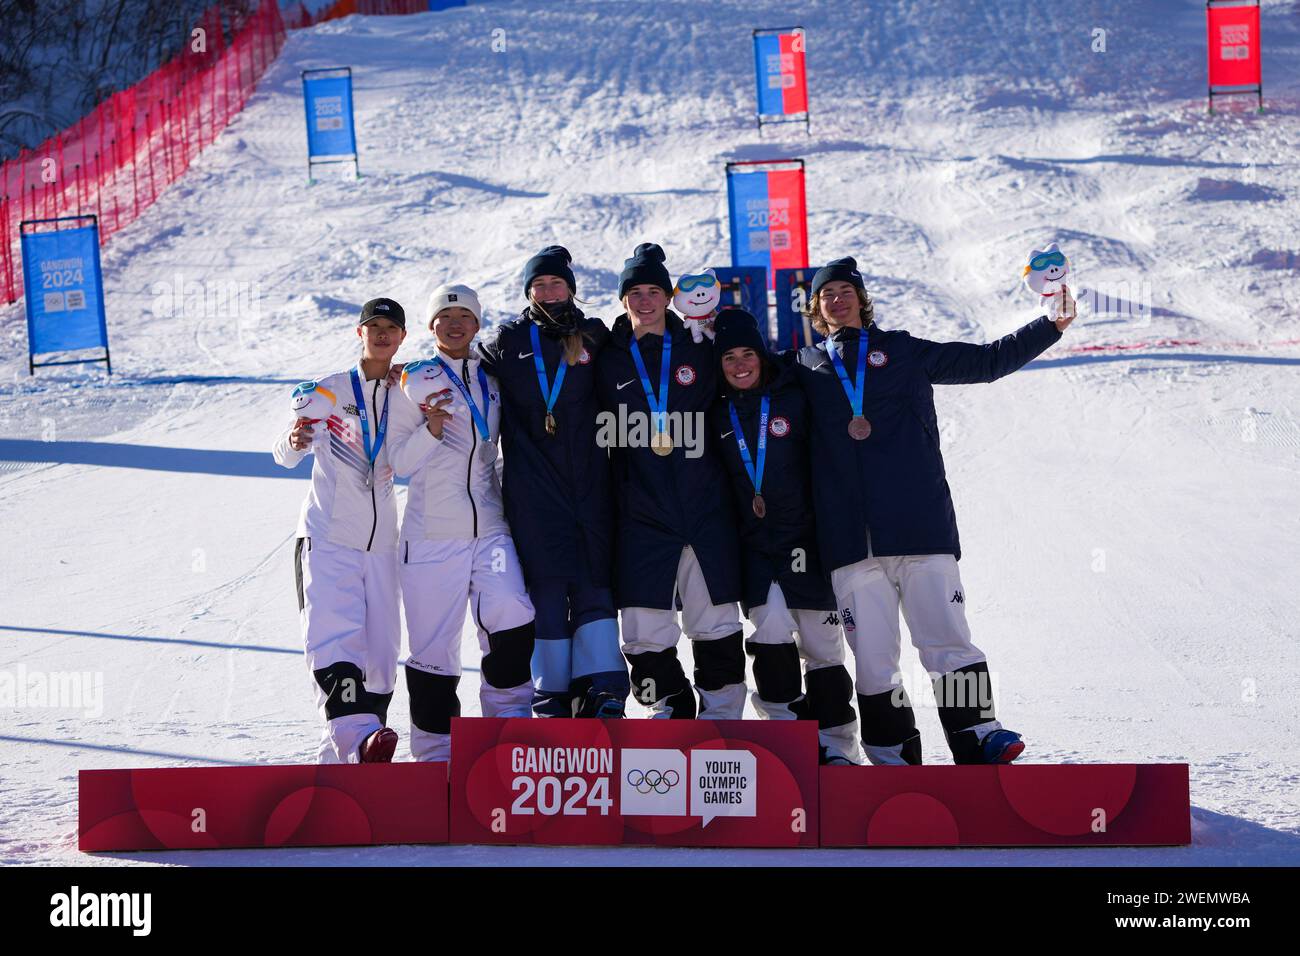 Jeongseon, South Korea. 26th Jan, 2024. Gold medalists Elizabeth Lemley(3rd L) and Porter Huff (3rd R) of the United States, silver medalists Yun Shin-Ee (1st L) and Lee Yoon Seung (2nd L) of South Korea and bronze medalists Abby McLarnon (2nd R) and Jiah Cohen of the United States pose on the podium during the victory ceremony for the Mixed Team Dual Moguls of Freestyle Skiing at the Gangwon 2024 Winter Youth Olympic Games in Jeongseon, South Korea, Jan. 26, 2024. Credit: Zhang Xiaoyu/Xinhua/Alamy Live News Stock Photo